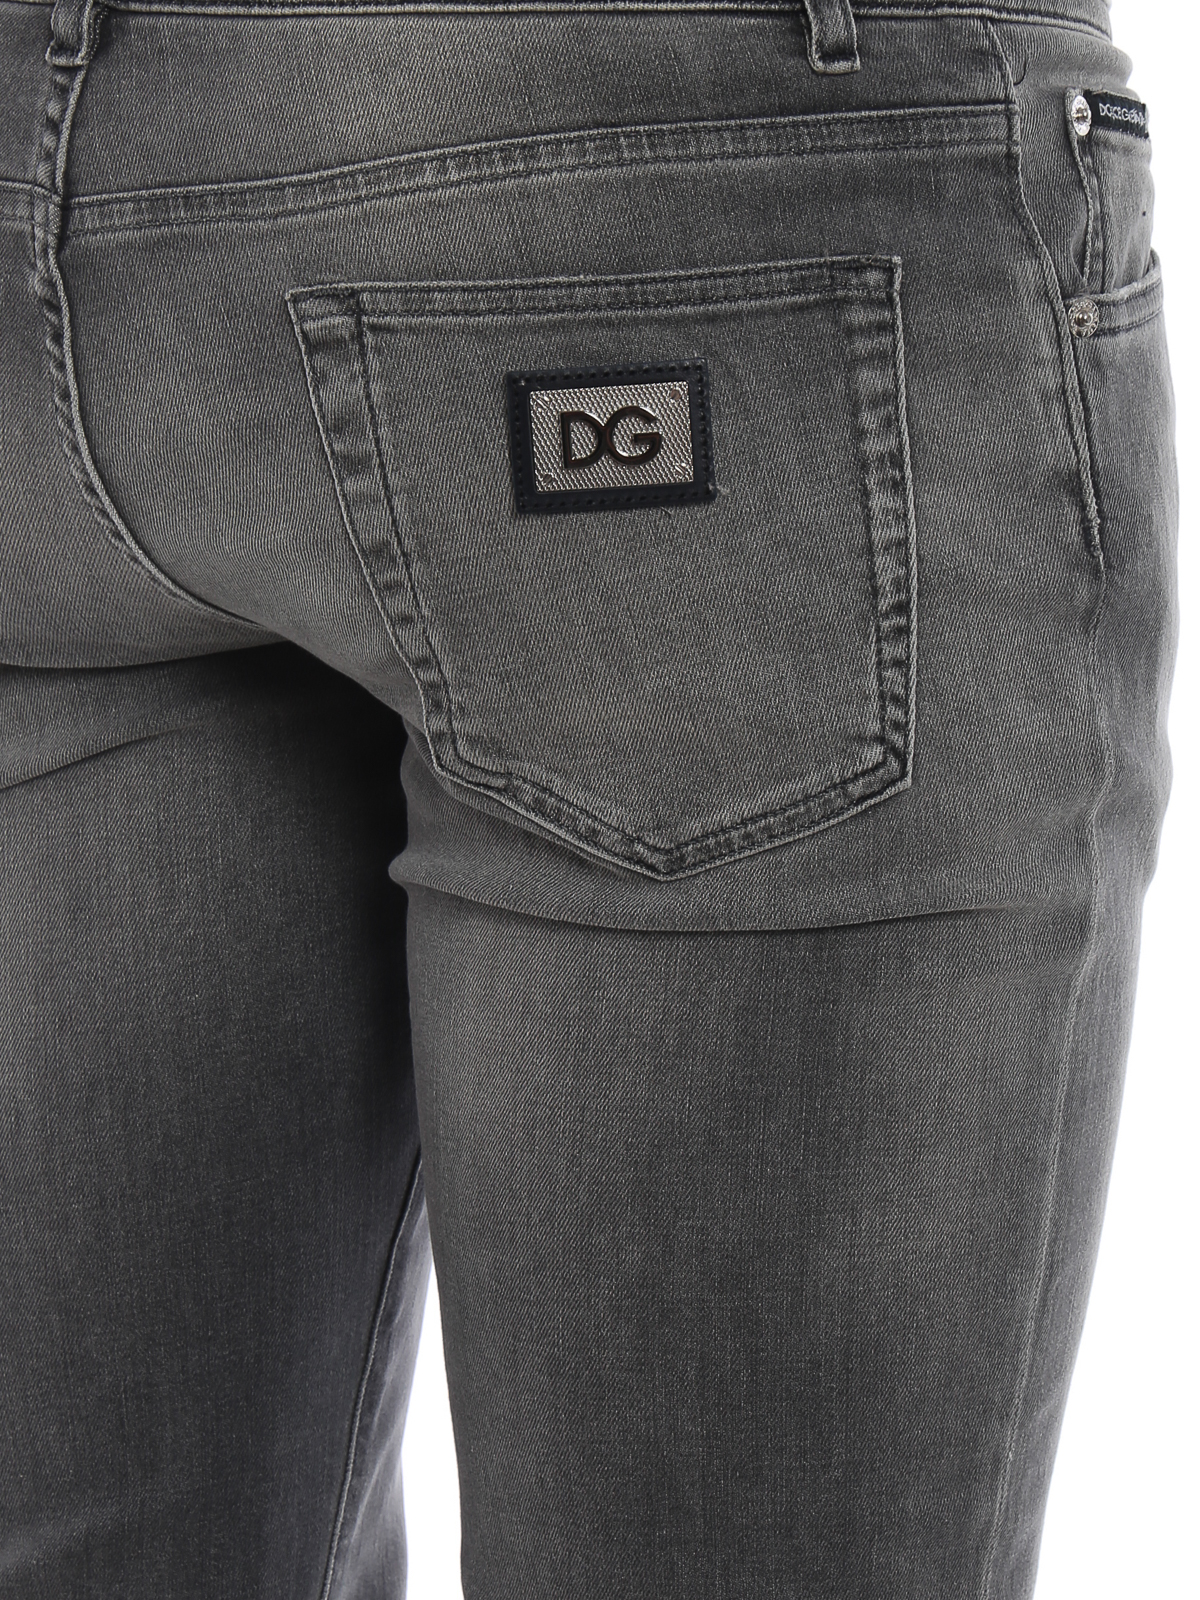 dolce and gabbana jeans